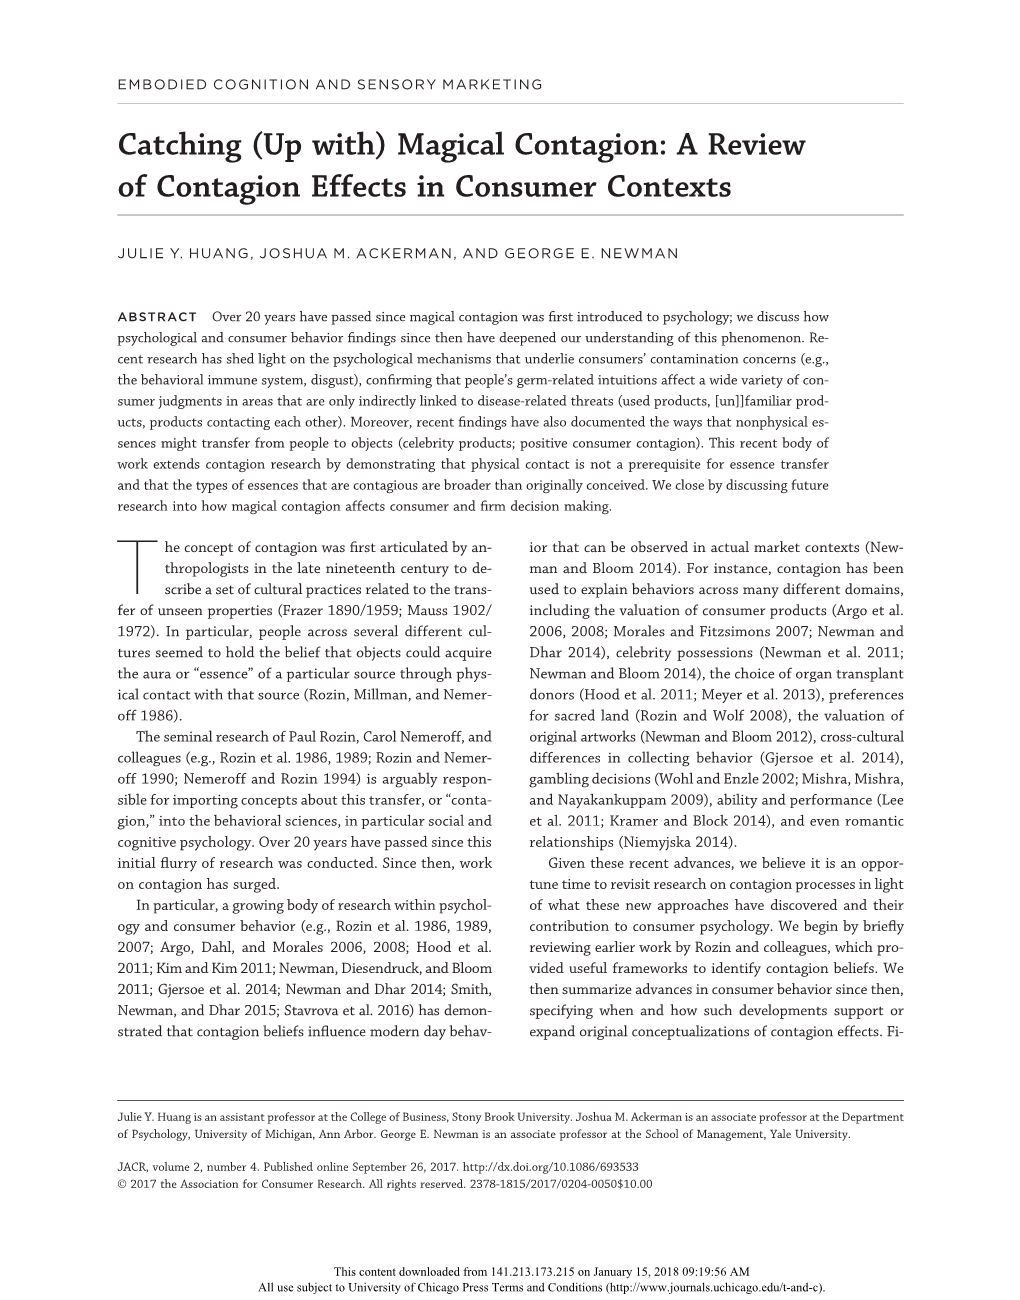 Magical Contagion: a Review of Contagion Effects in Consumer Contexts